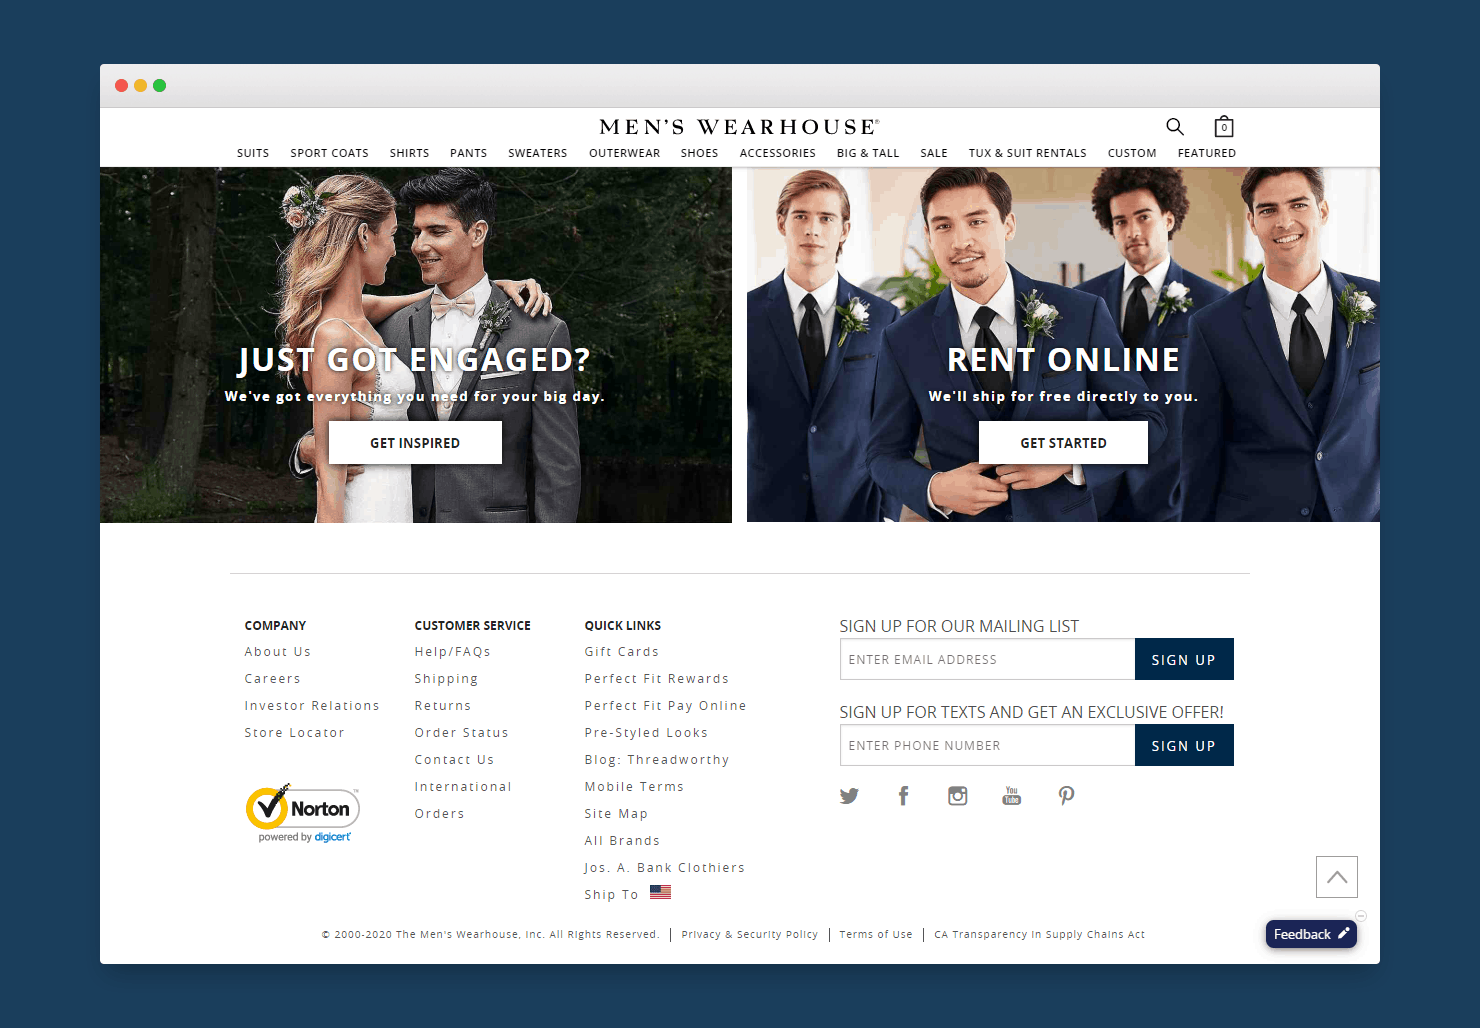 Mens Wearhouse Advertising SMS Marketing Campaign on Website